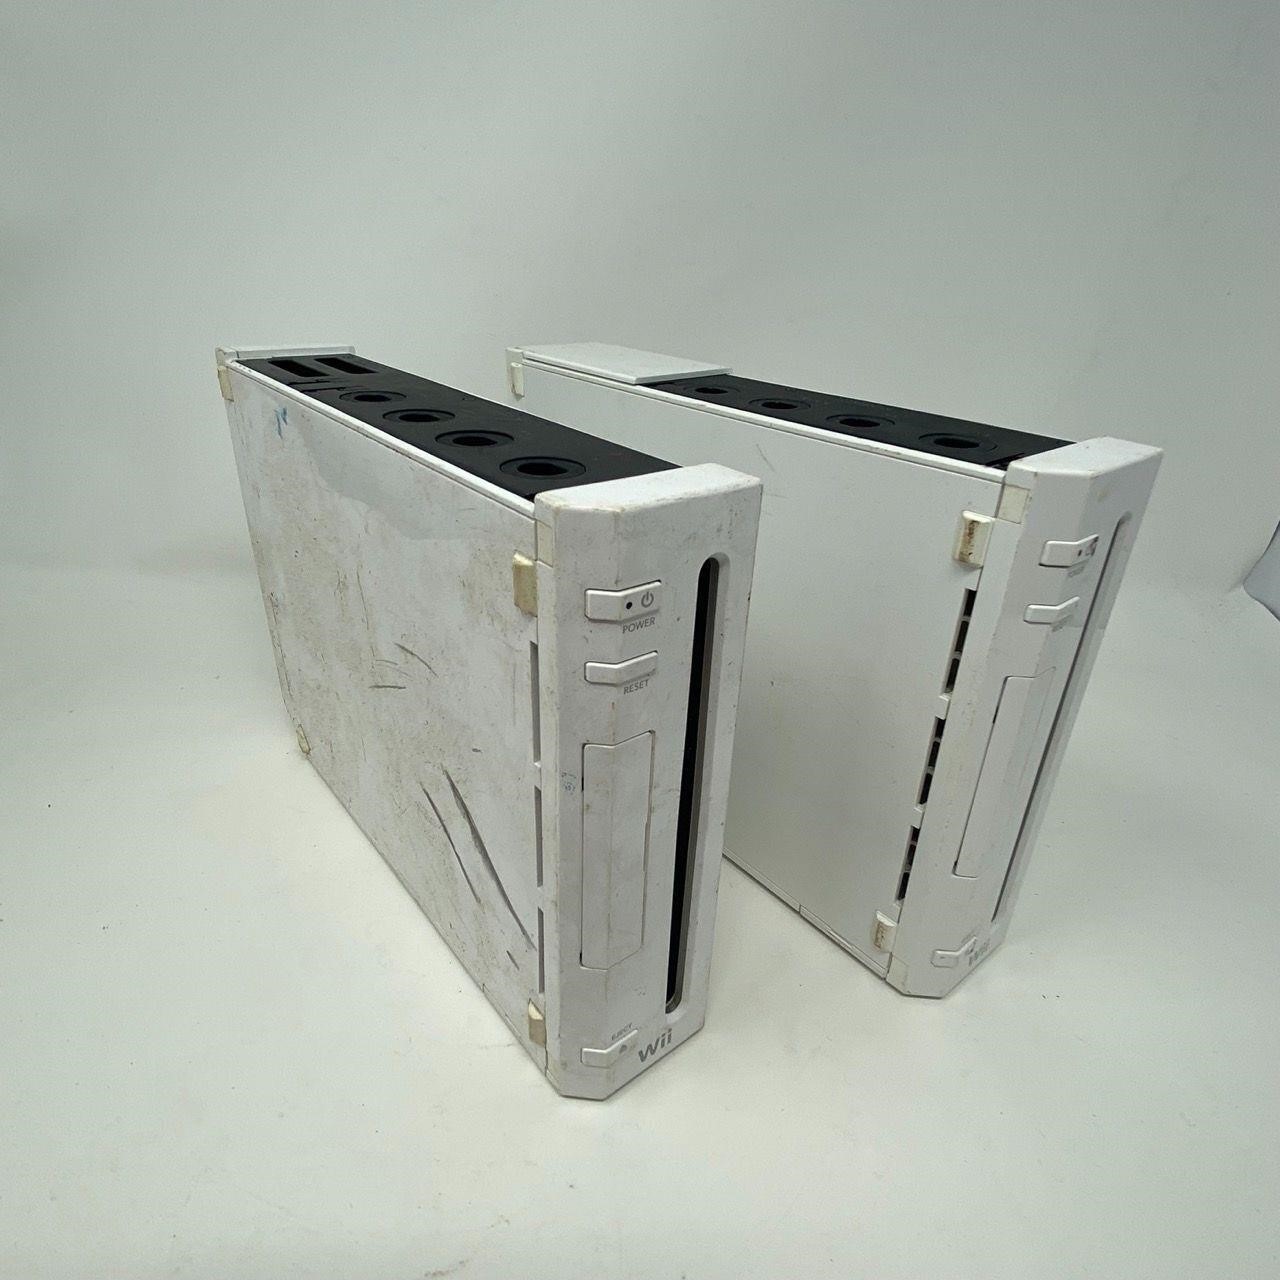 Nintendo Wii consoles as is for parts